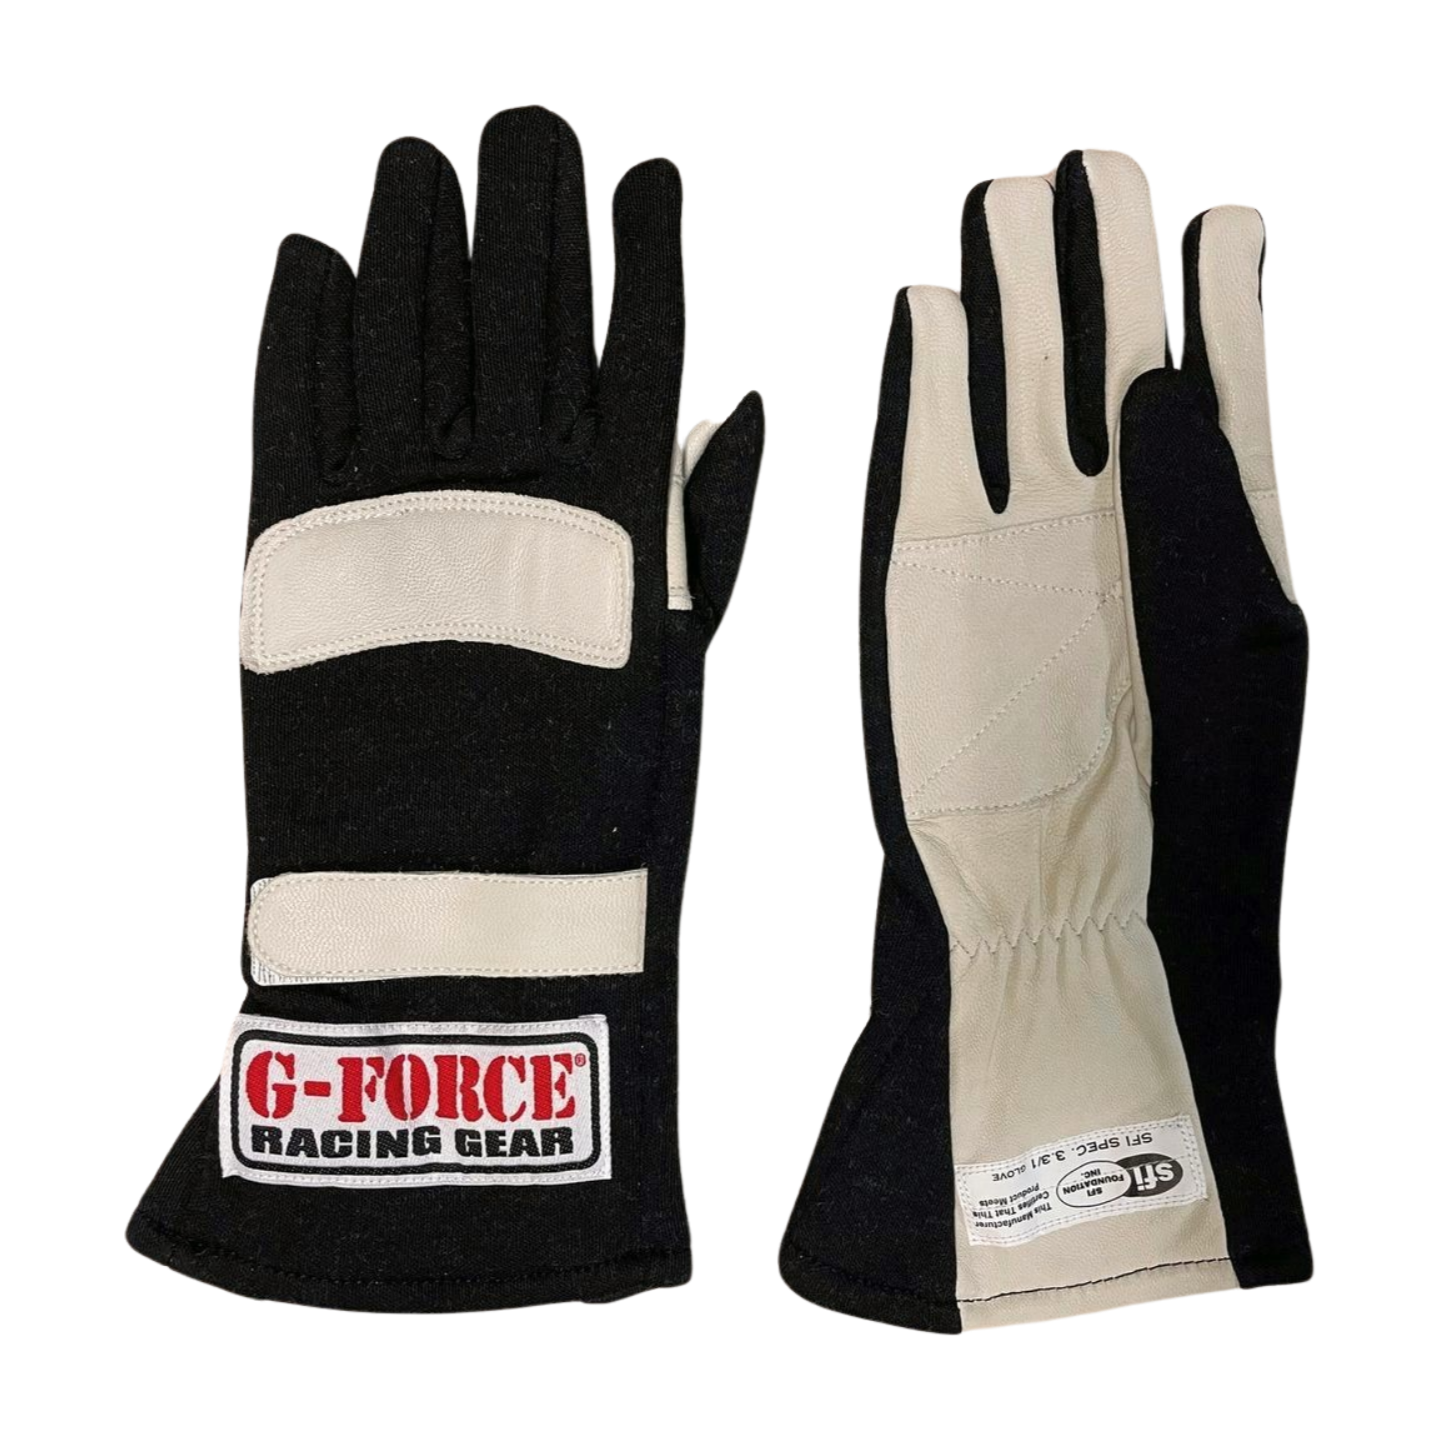 G-FORCE Racing Gear Gloves